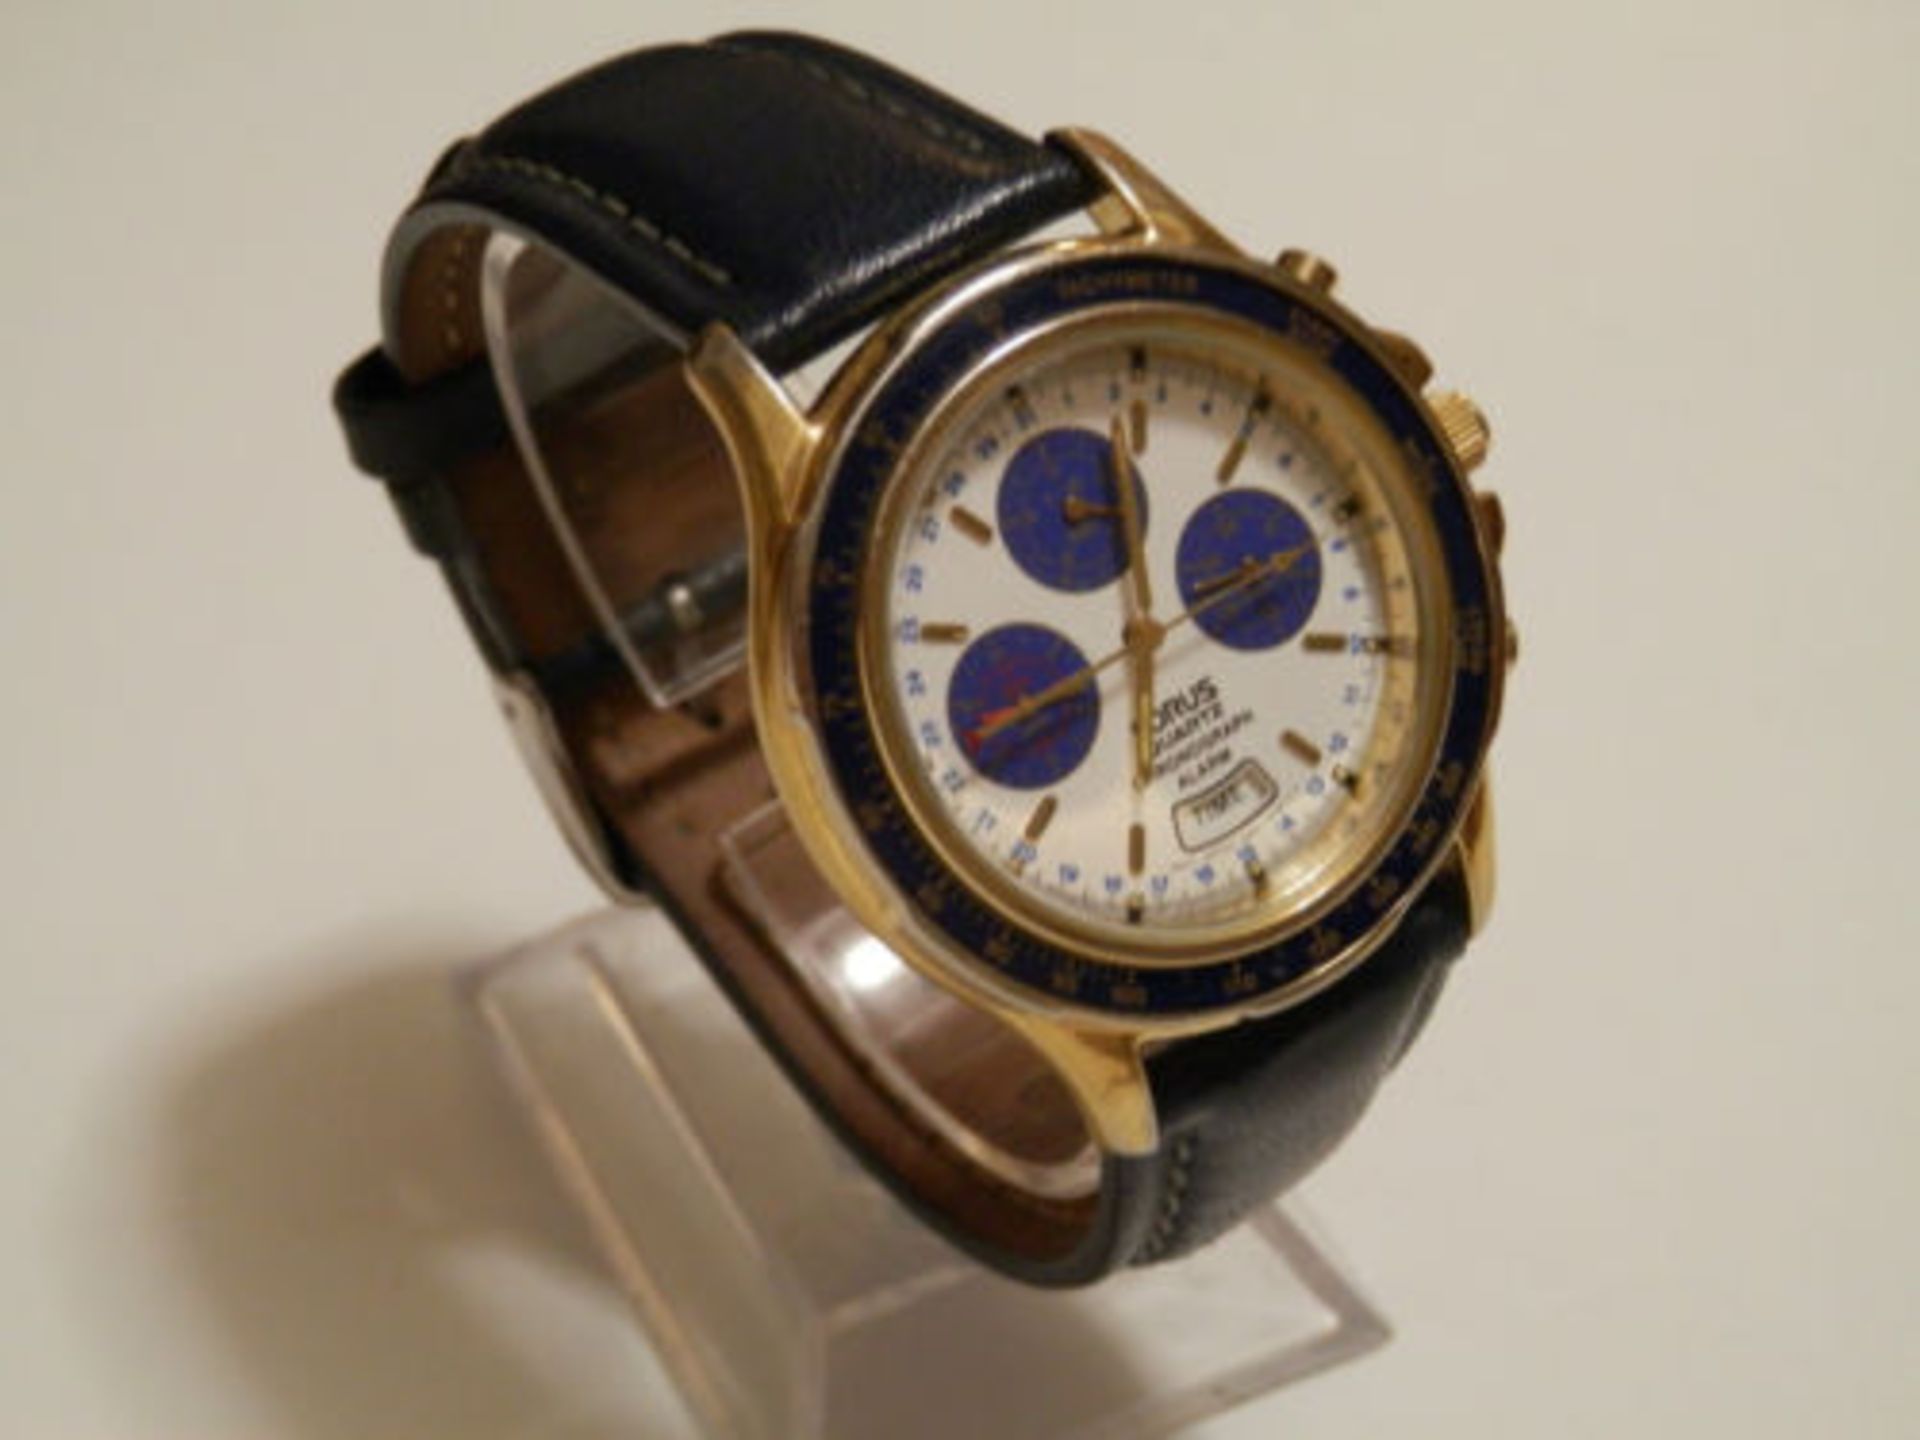 RETRO GENTS LORUS 1990S MINI DIAL CHRONOGRAPH, ALARM, DATE WATCH. KEEPING TIME. - Image 5 of 11